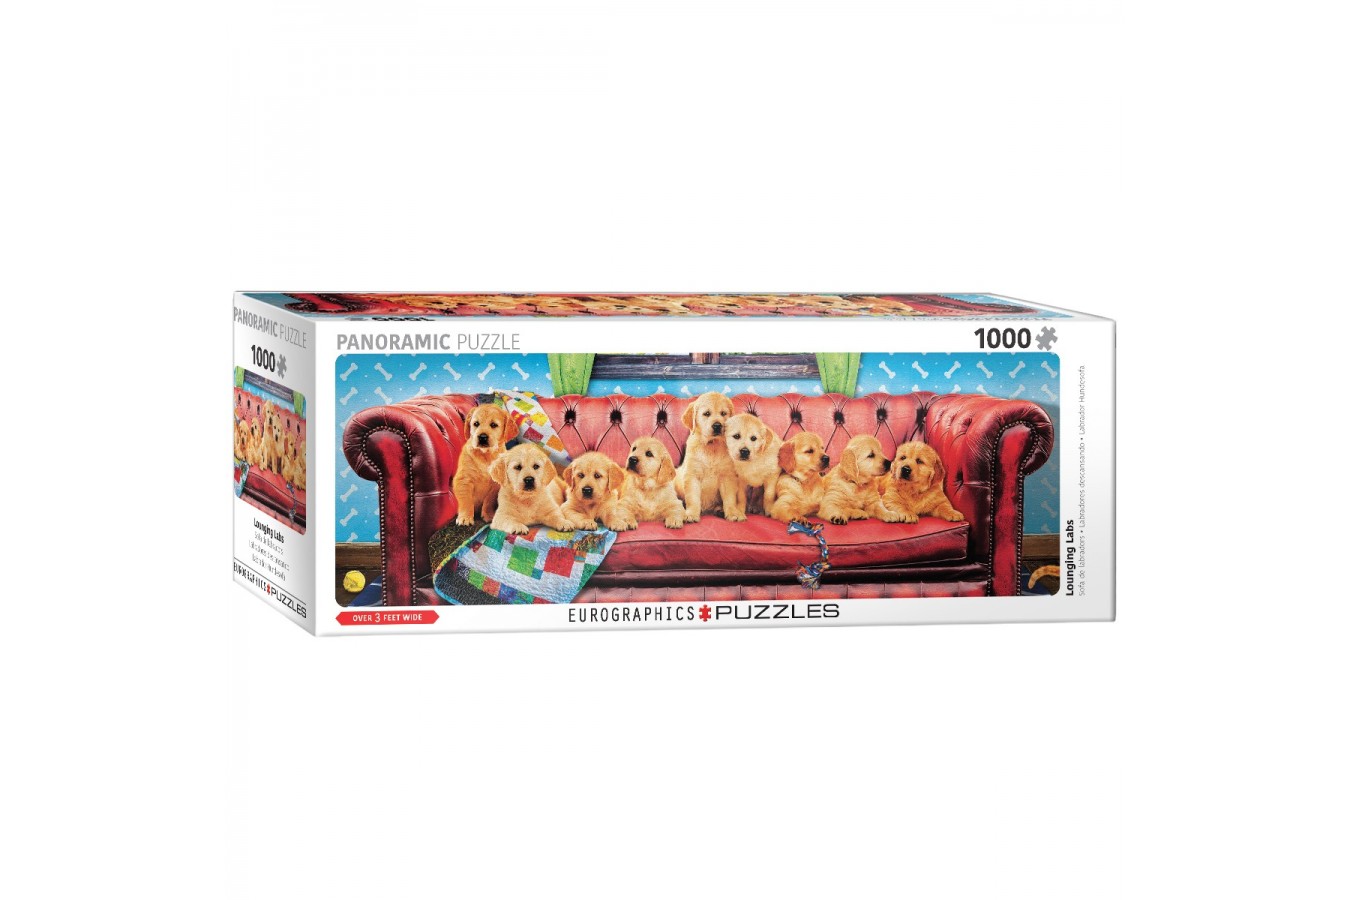 Puzzle 1000 piese panoramic Eurographics - Lounging Labs (Eurographics-6010-5630)